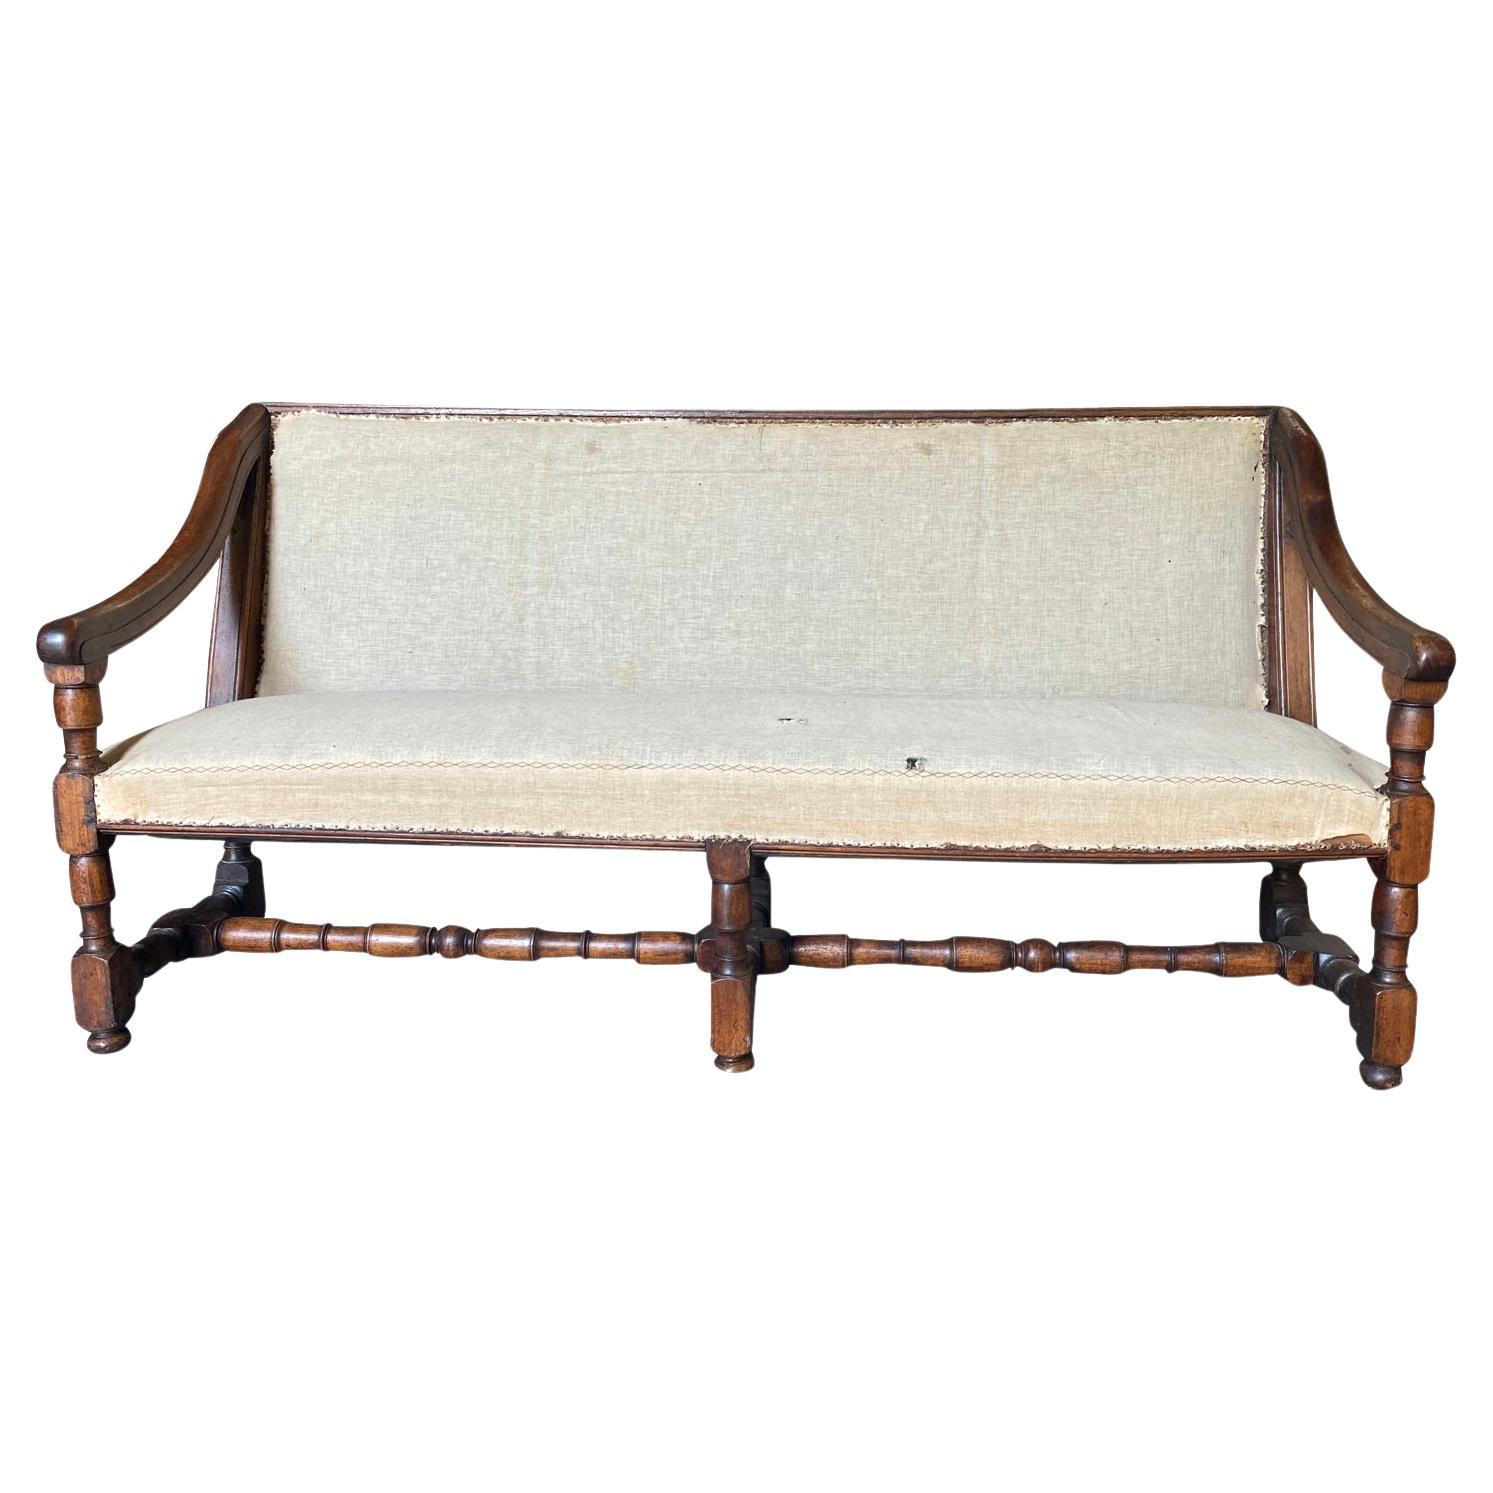 An exceptional mid-18th century Louis XIII style Sofa from the Provence region of France.  Beautifully constructed with handsome walnut and original horse hair stuffing.  This wonderful piece has hinges and butterfly bolts at the back.  Once the